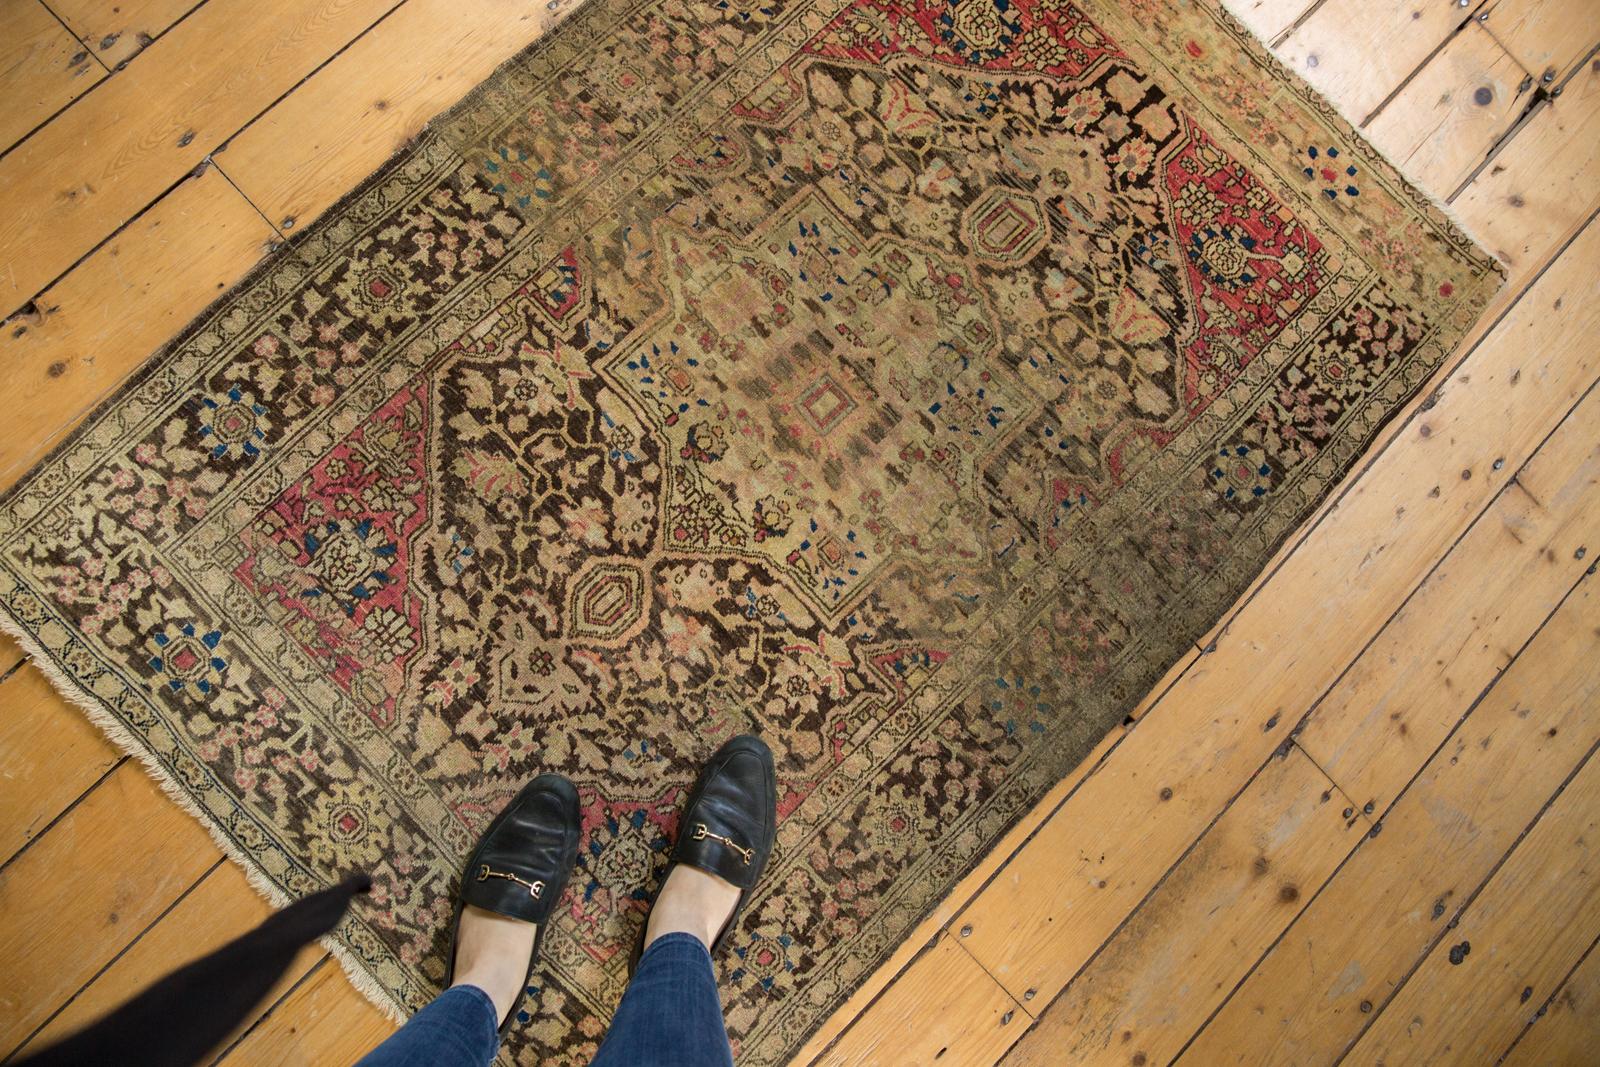 :: Antique vintage 1915 Persian Farahan Sarouk carpet with stunning raspberry, charcoal, beige, silvers, and greige throughout. Light touches of light powder blues and aqua as well! Fully secured sides and ends. Many years of enjoyment to come with